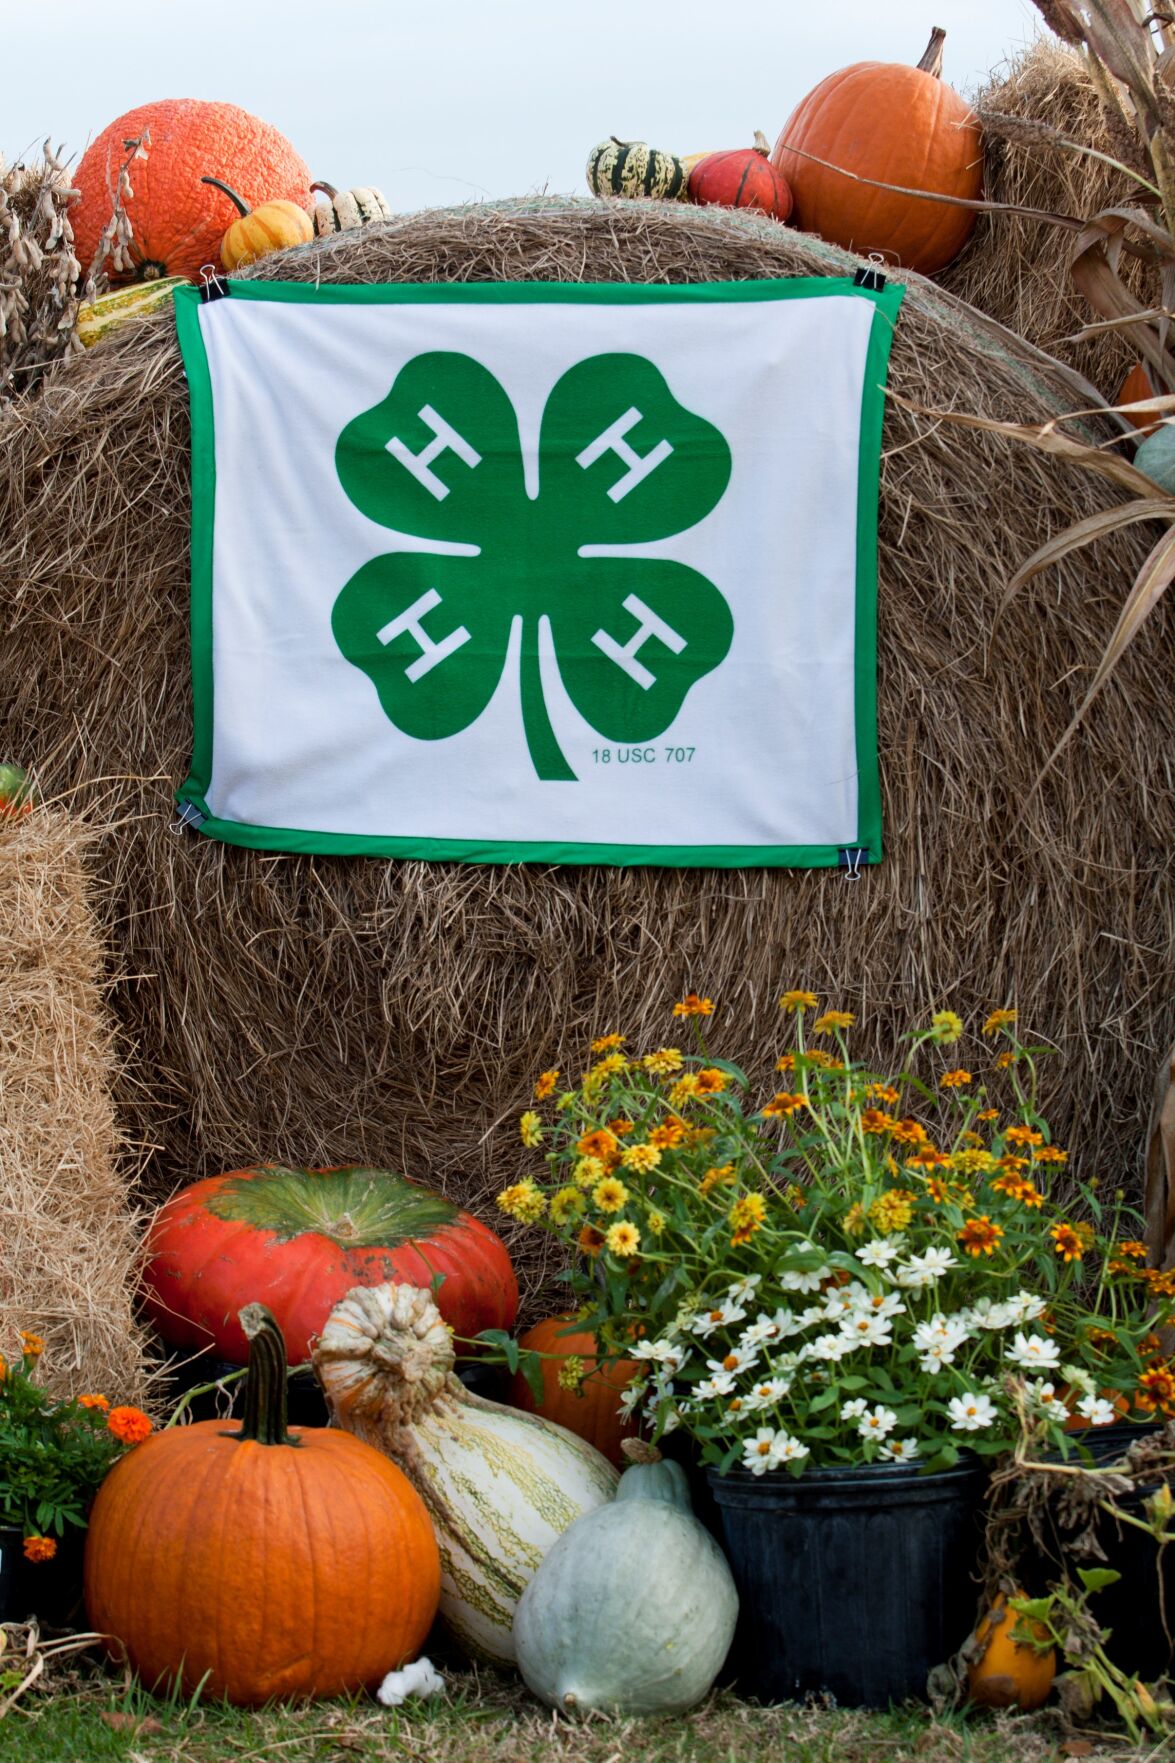 National 4H Week Giving youth the chance to grow, learn and lead